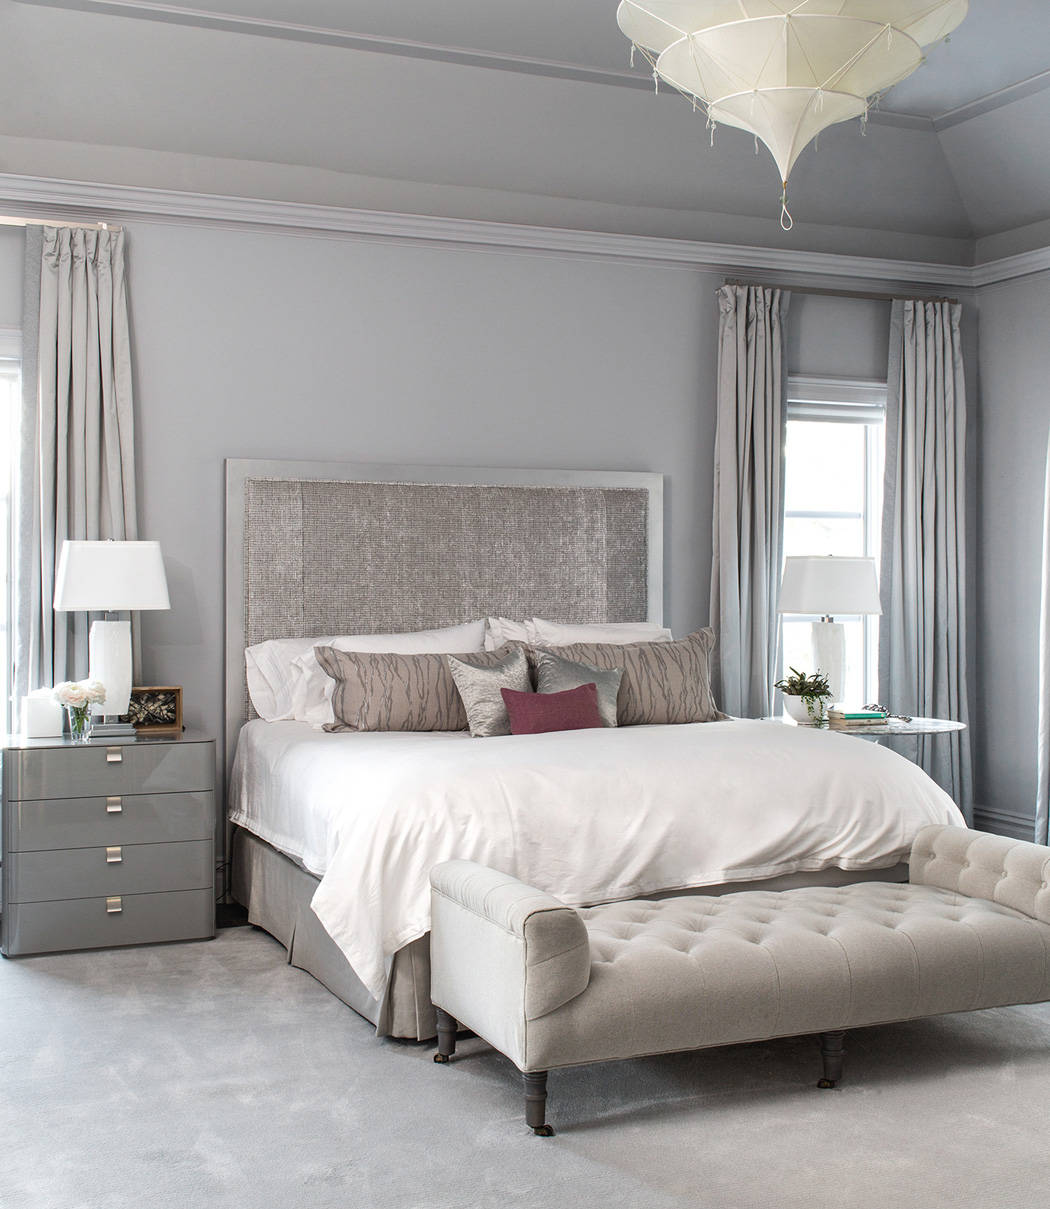 Curtains With Gray Walls Ideas Photos Houzz